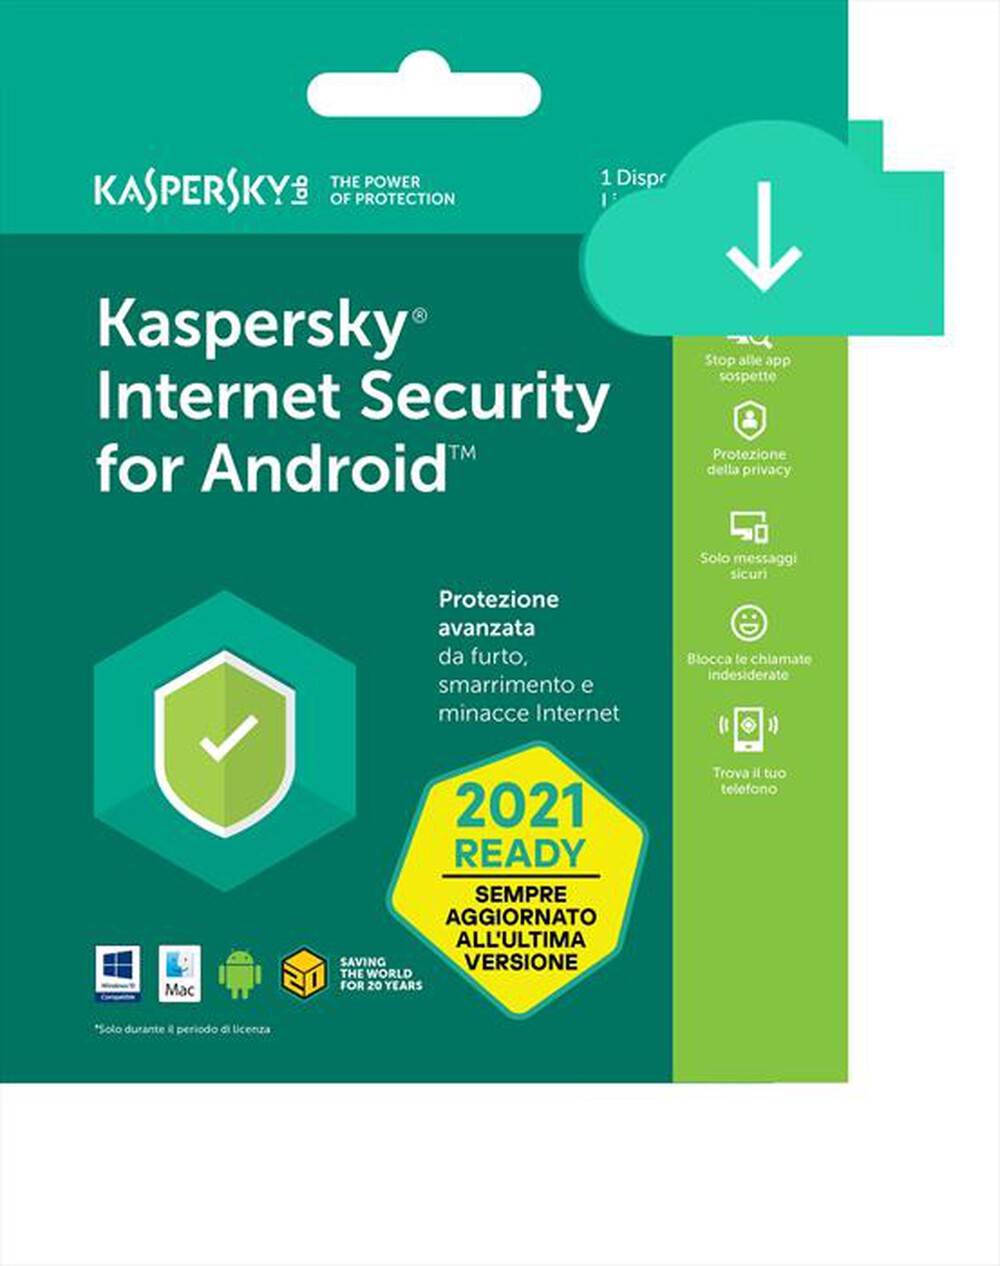 "KASPERSKY - Internet Security for Android – 1 user - "